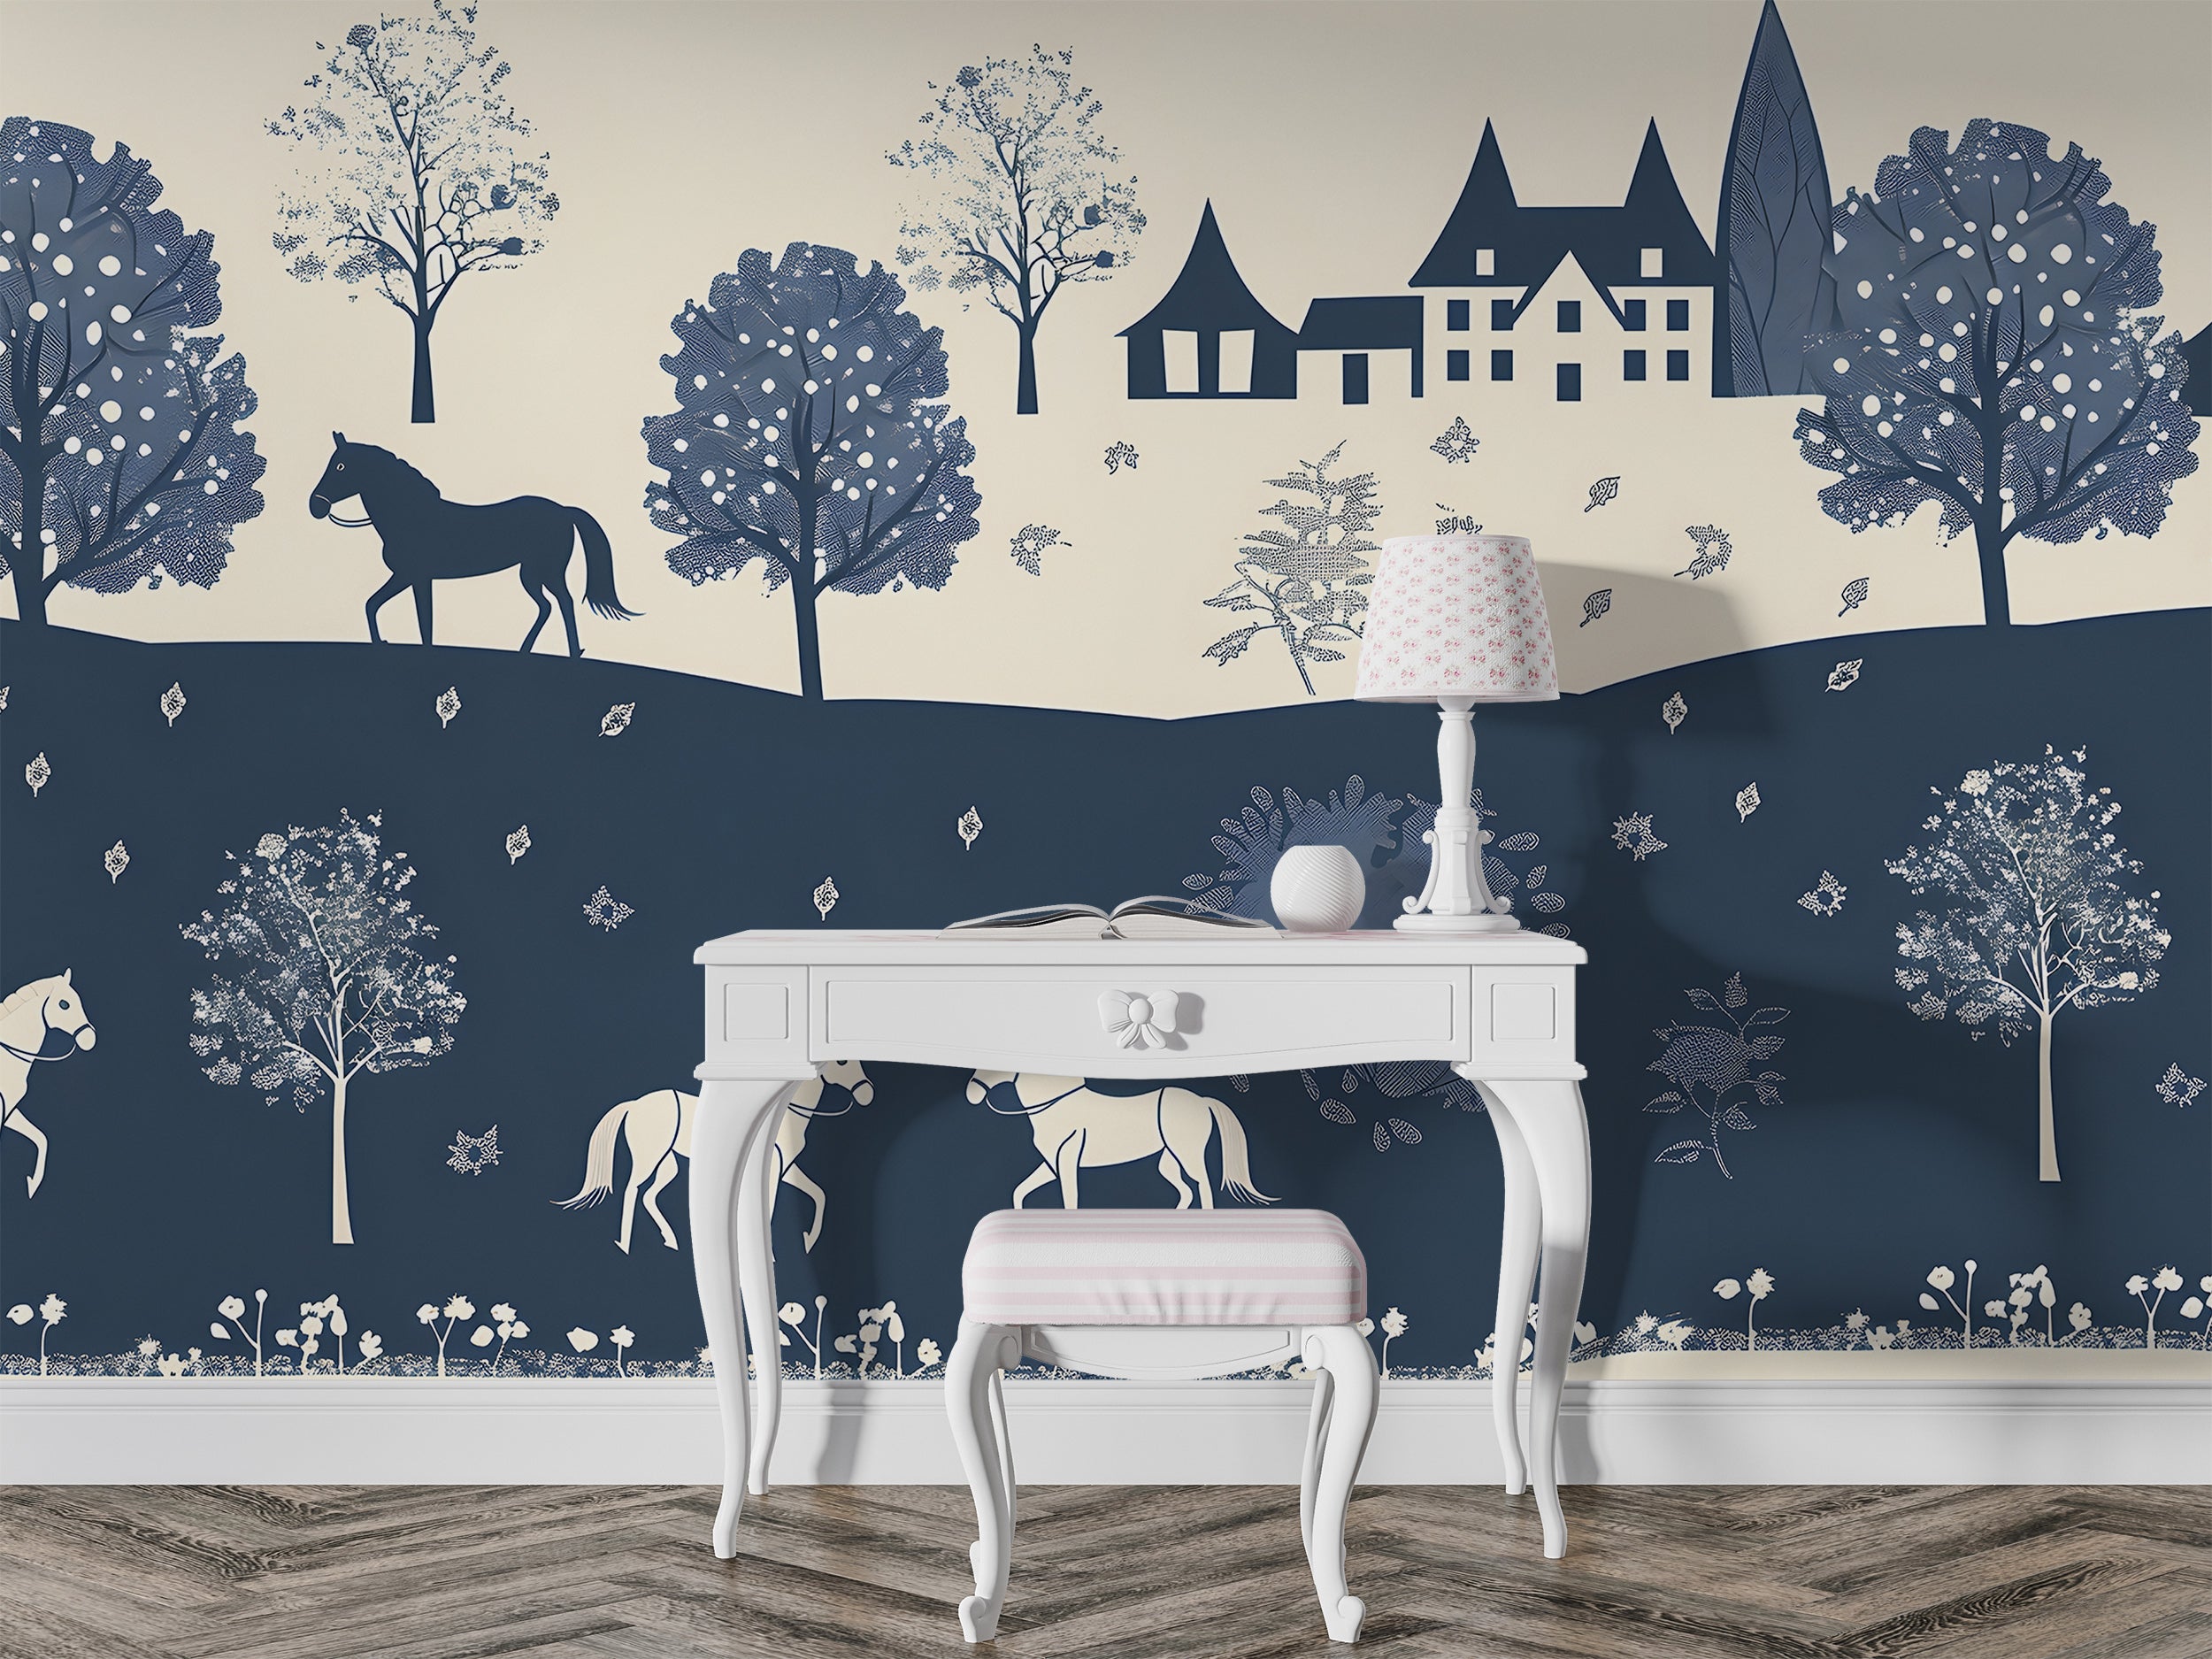 Blue and Beige Traditional Wallpaper, Watercolor Old Town Landscape Mural, Horizontal Seamless Pattern Classic Wallpaper, Peel and Stick House and Horses